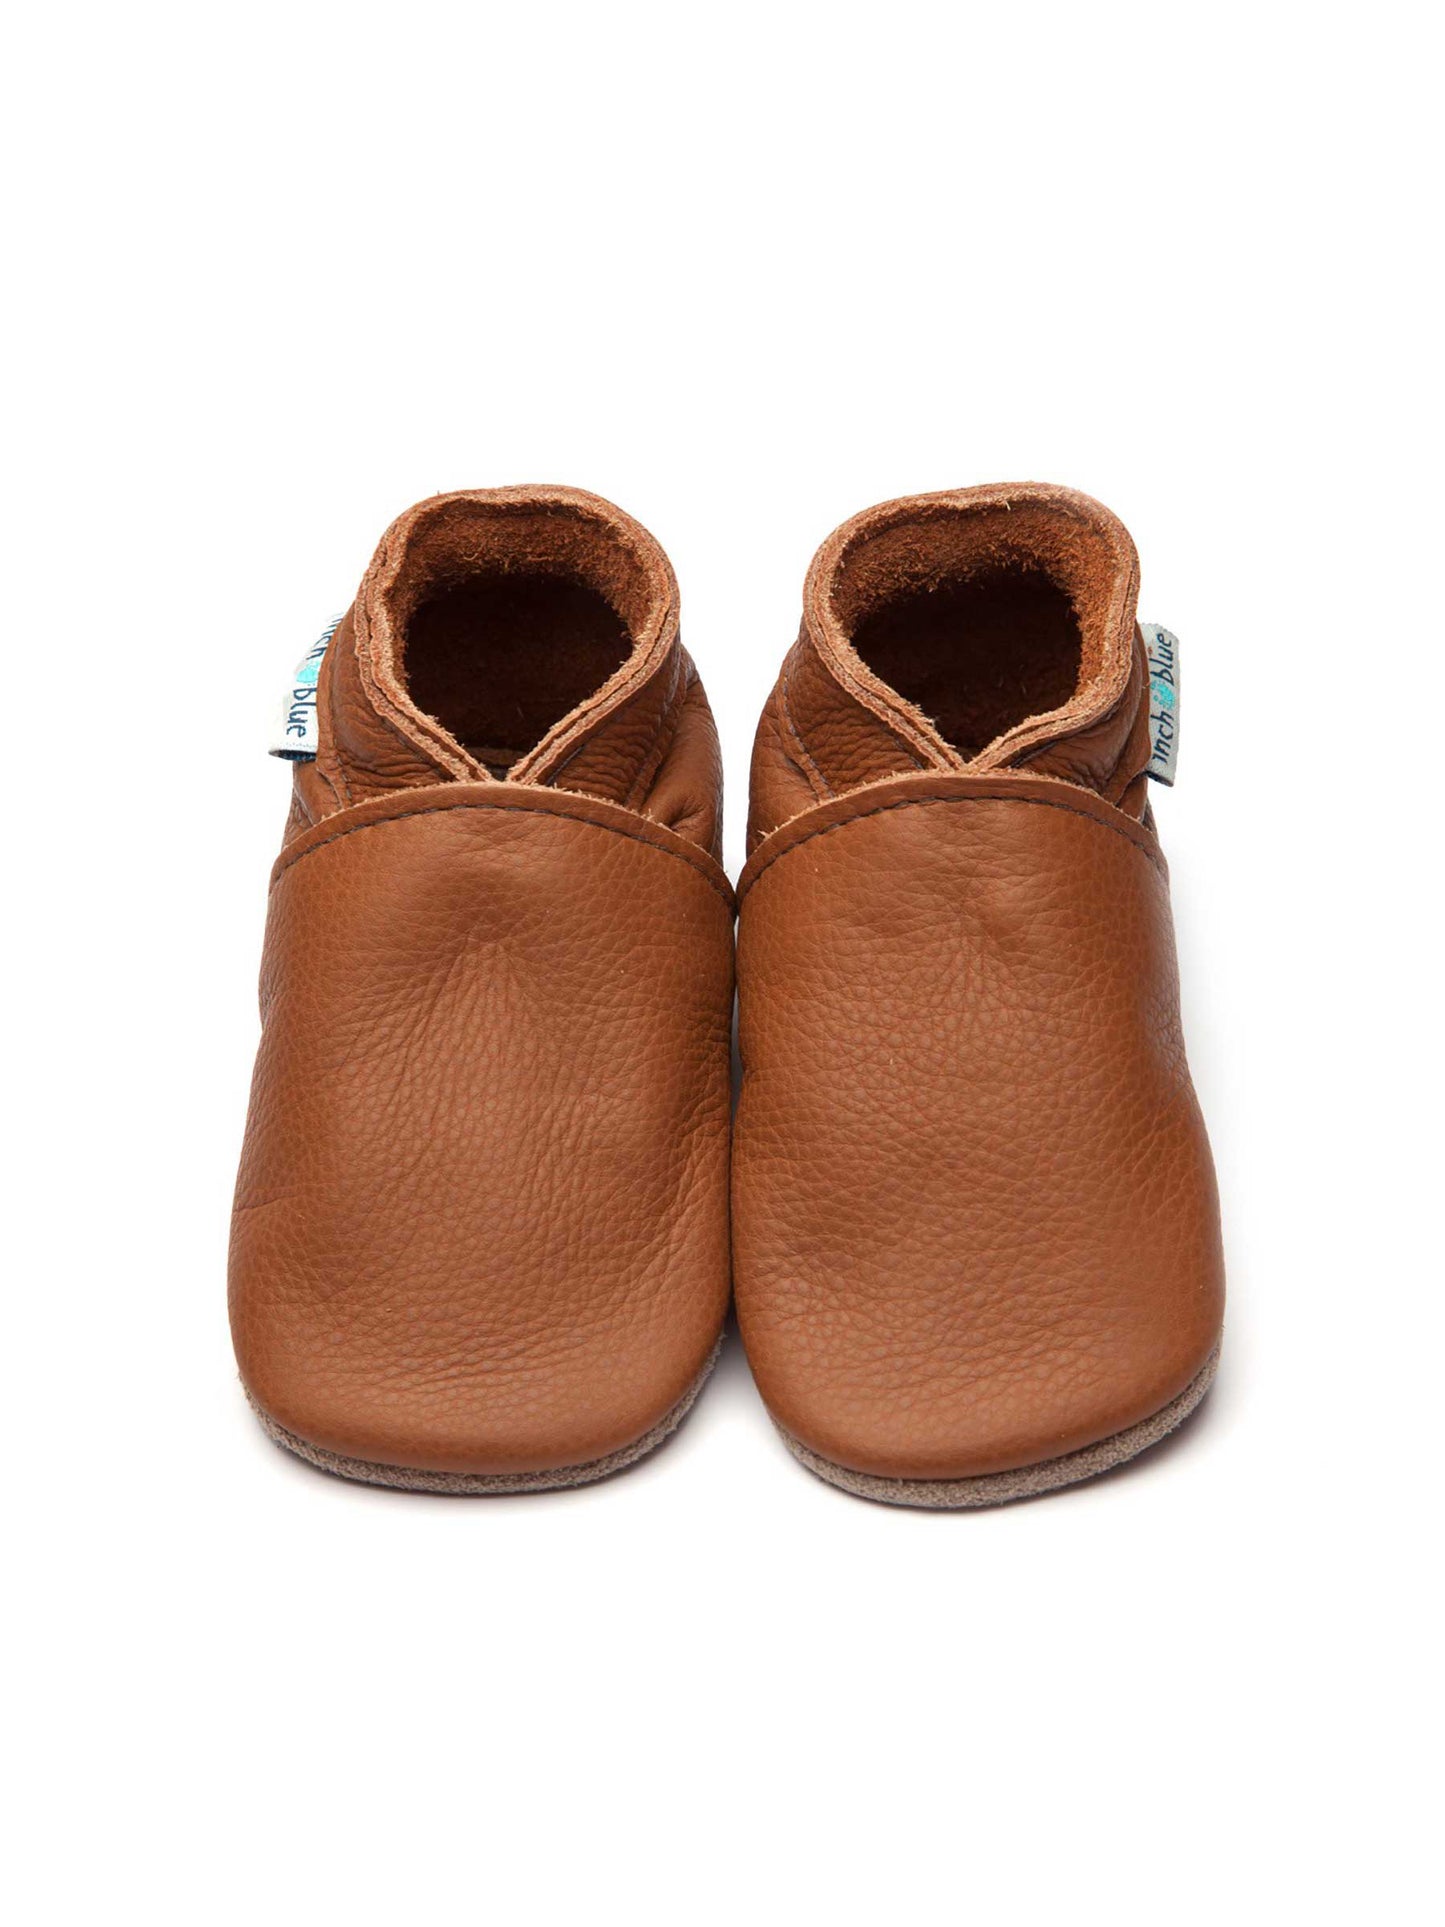 Caramel Baby Shoes